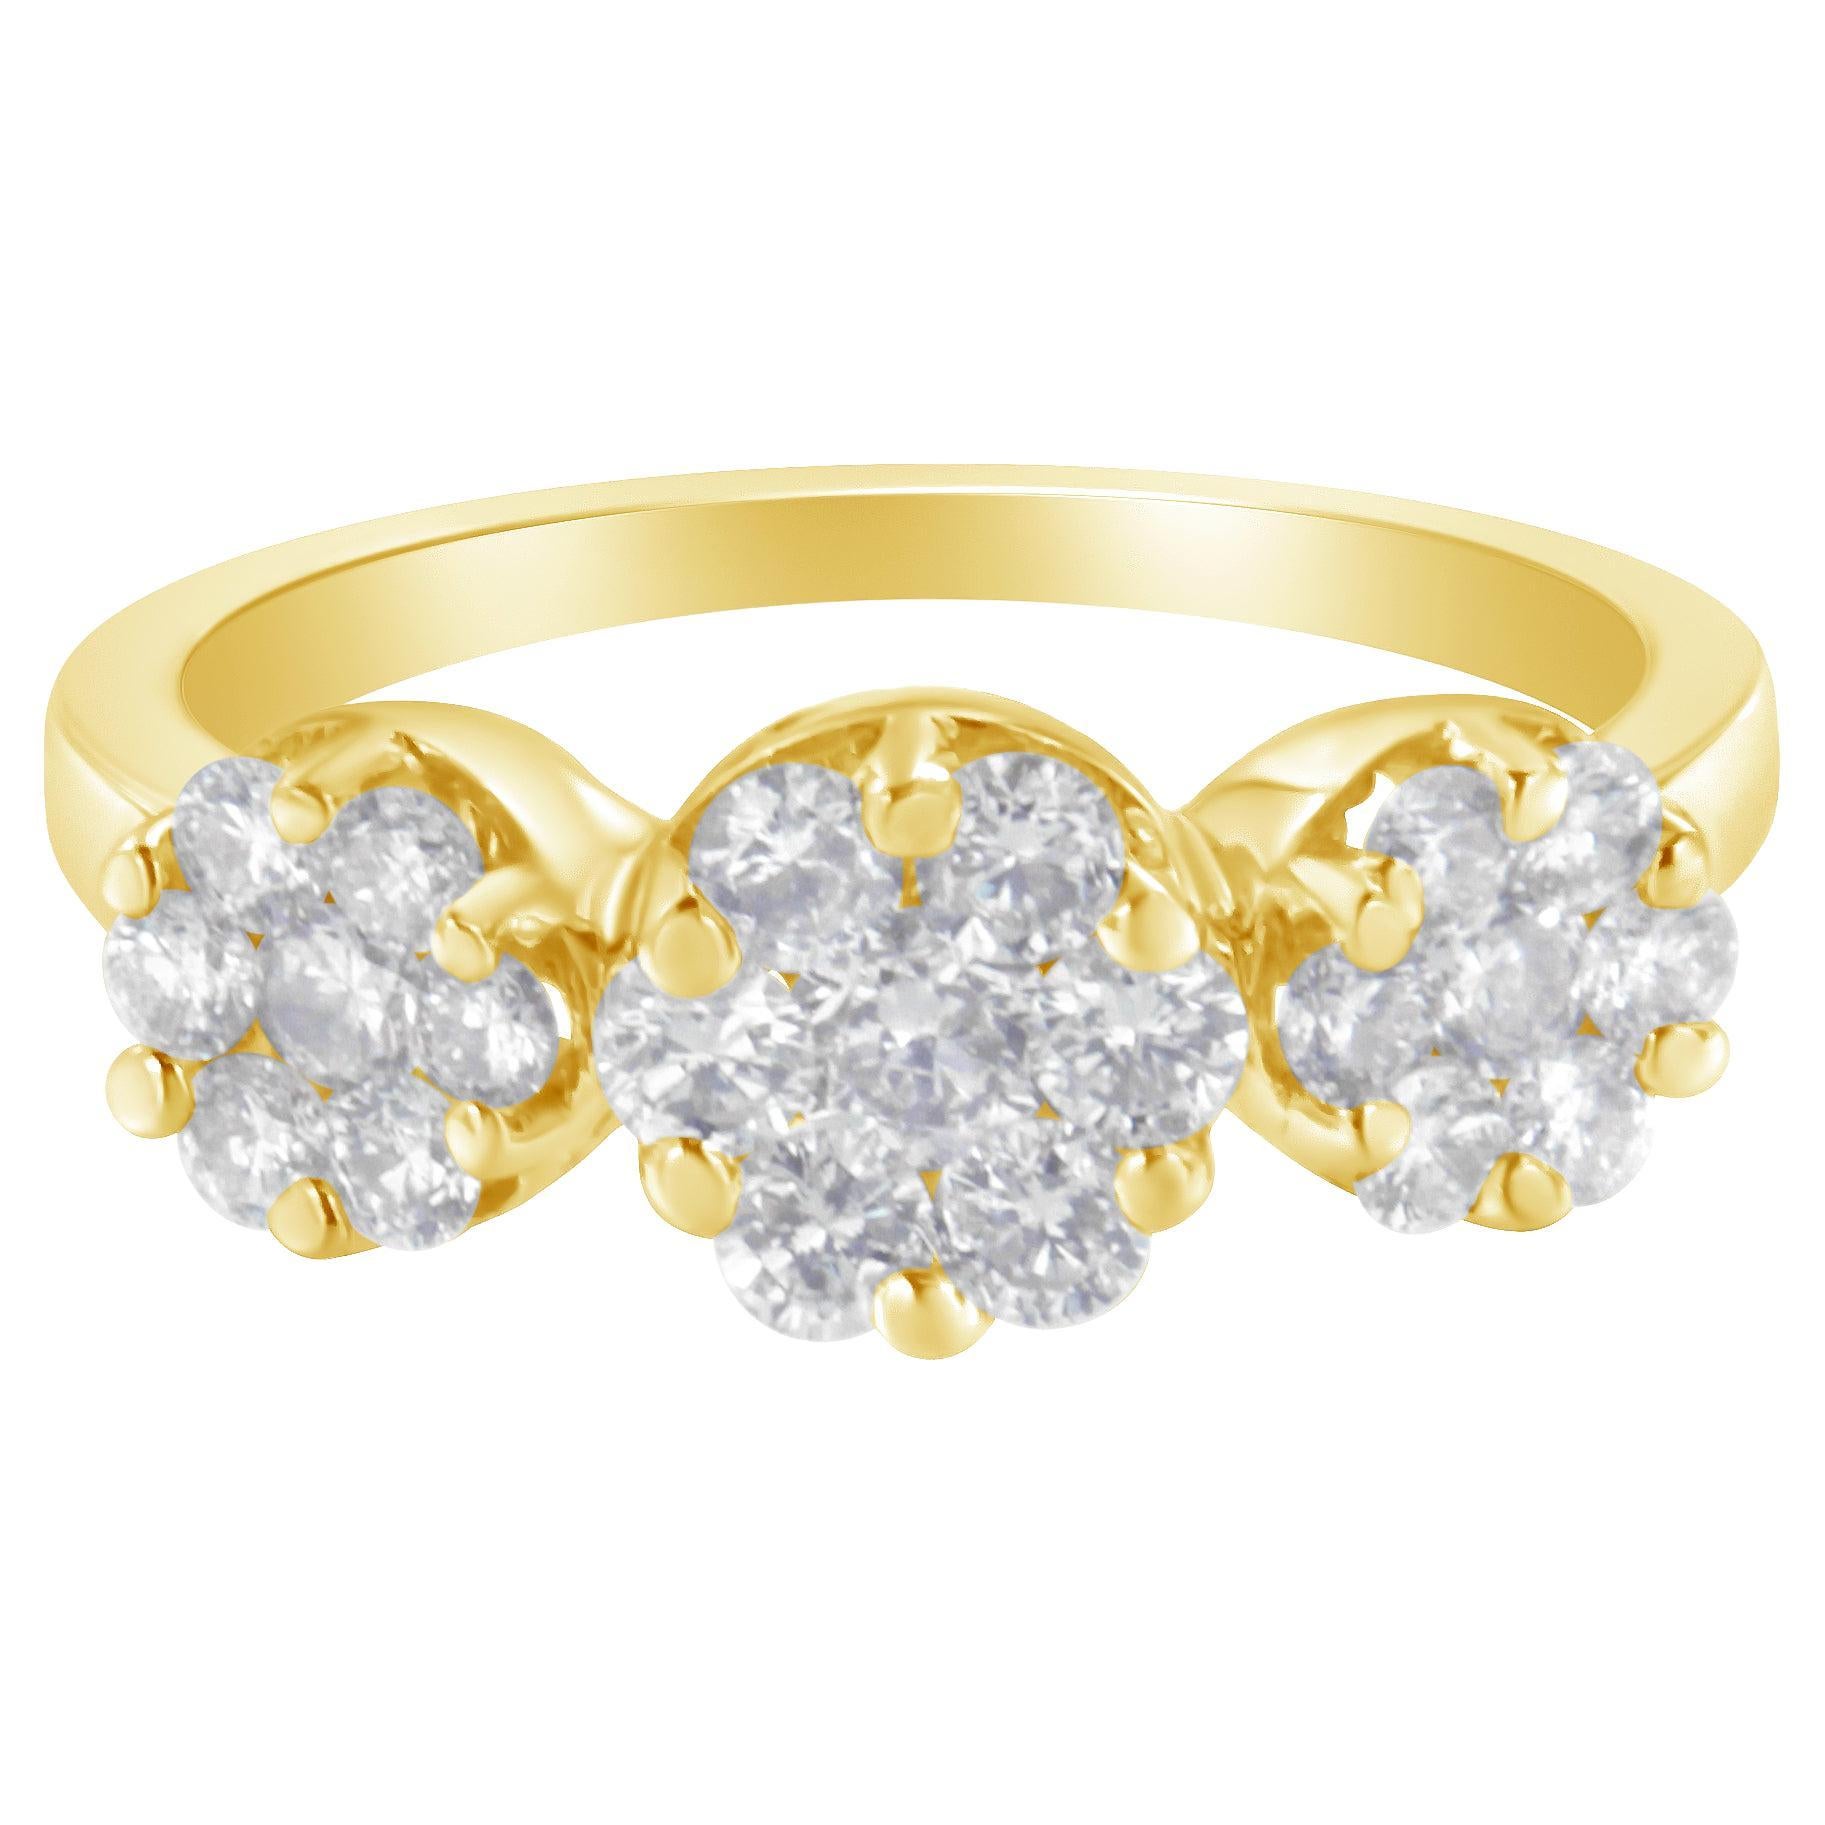 14K Yellow Gold 1 ¼ Carat Three Round Floral Clusters Diamond Ring